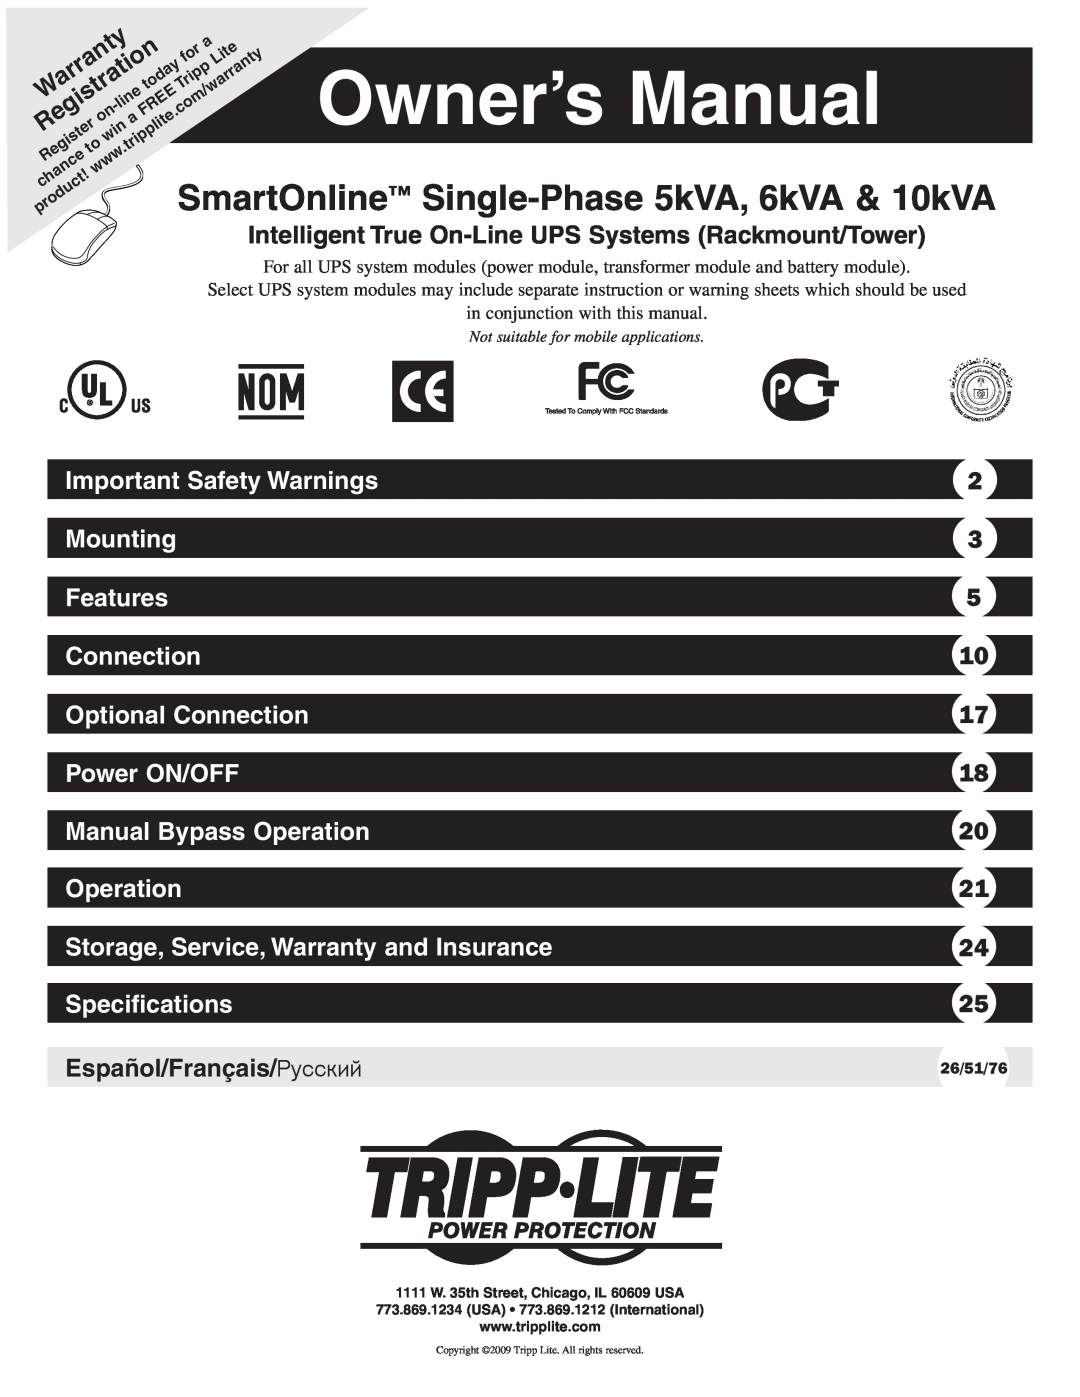 Tripp Lite 10KVA owner manual Owner’s Manual, Intelligent True On-Line UPS Systems Rackmount/Tower 